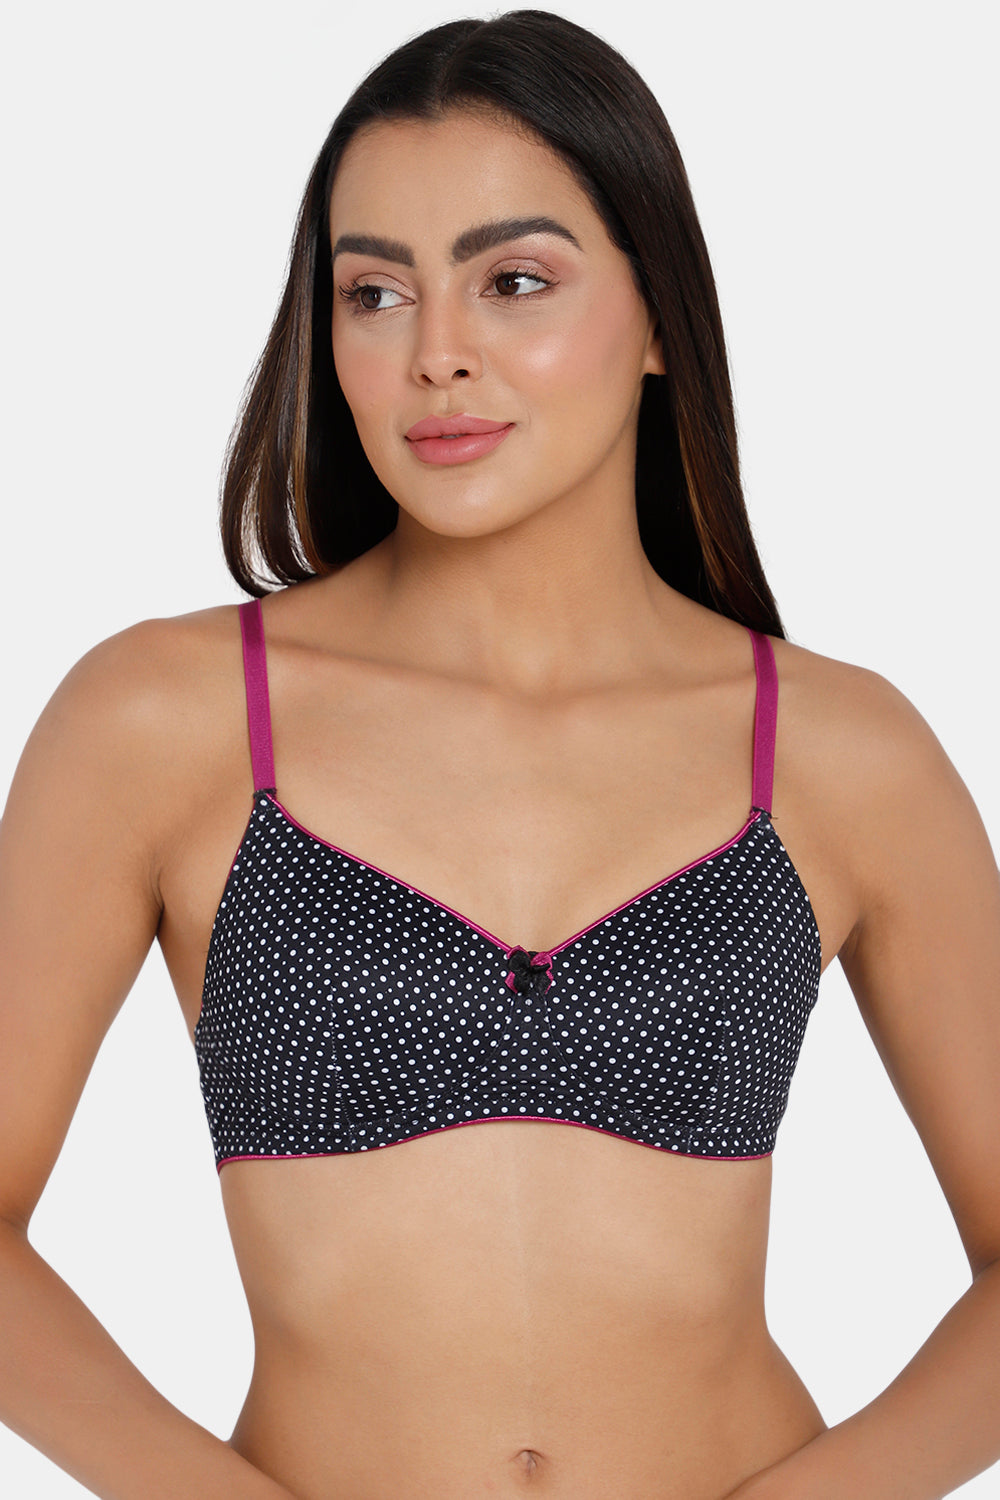 Buy Naidu Hall Bra for Women, Non-Padded, Non-Wired, Cotton Bra for  Women Daily use, Everyday Bra for Women, Criss-Cross Neck Line